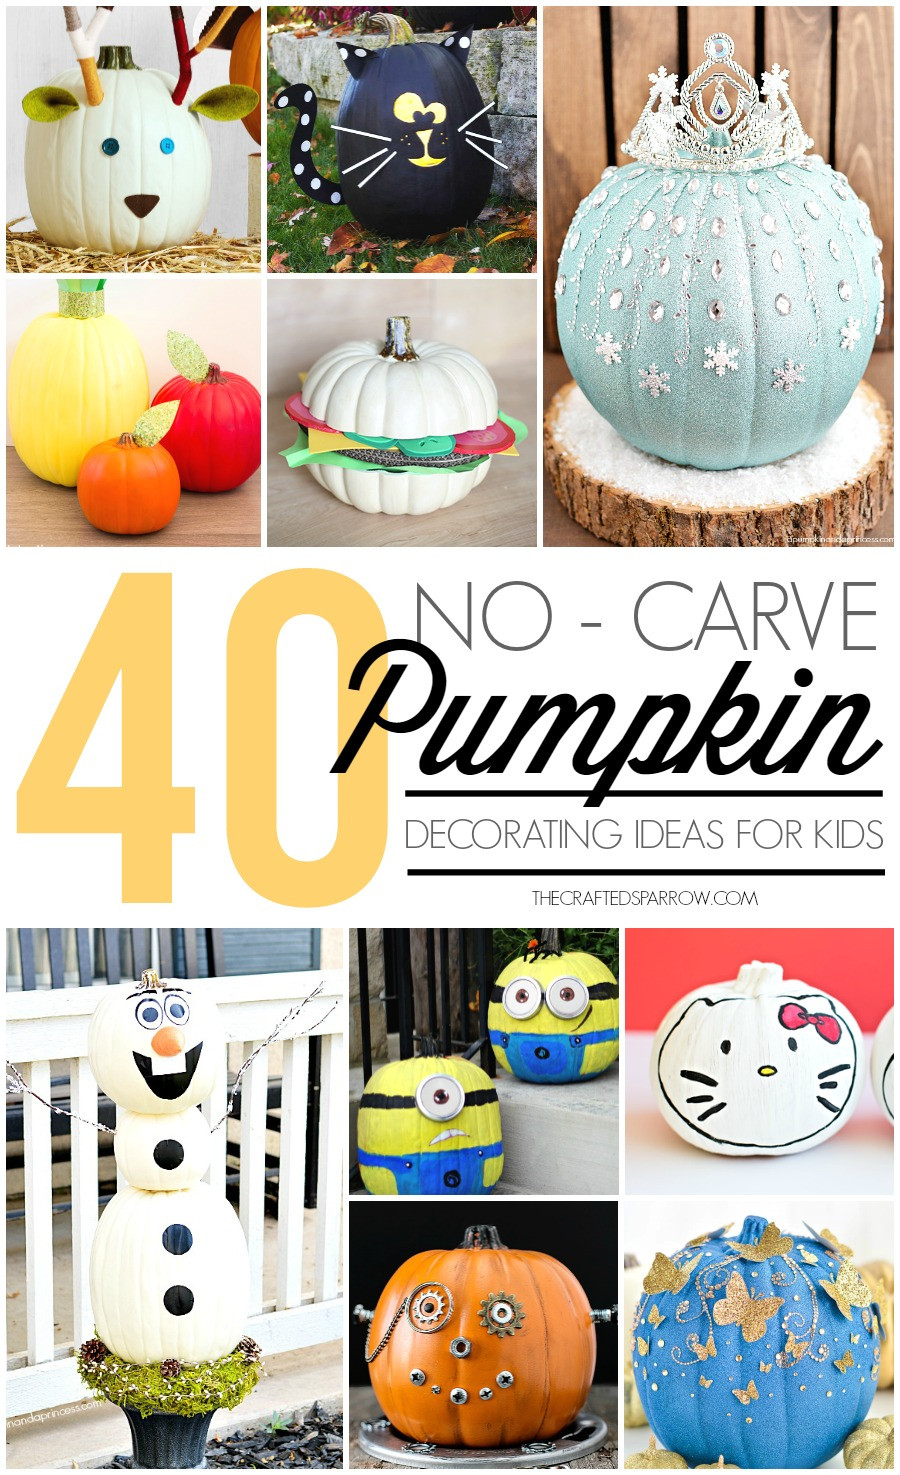 Kids Pumpkin Decorating Ideas
 The Creative Collection Link Party